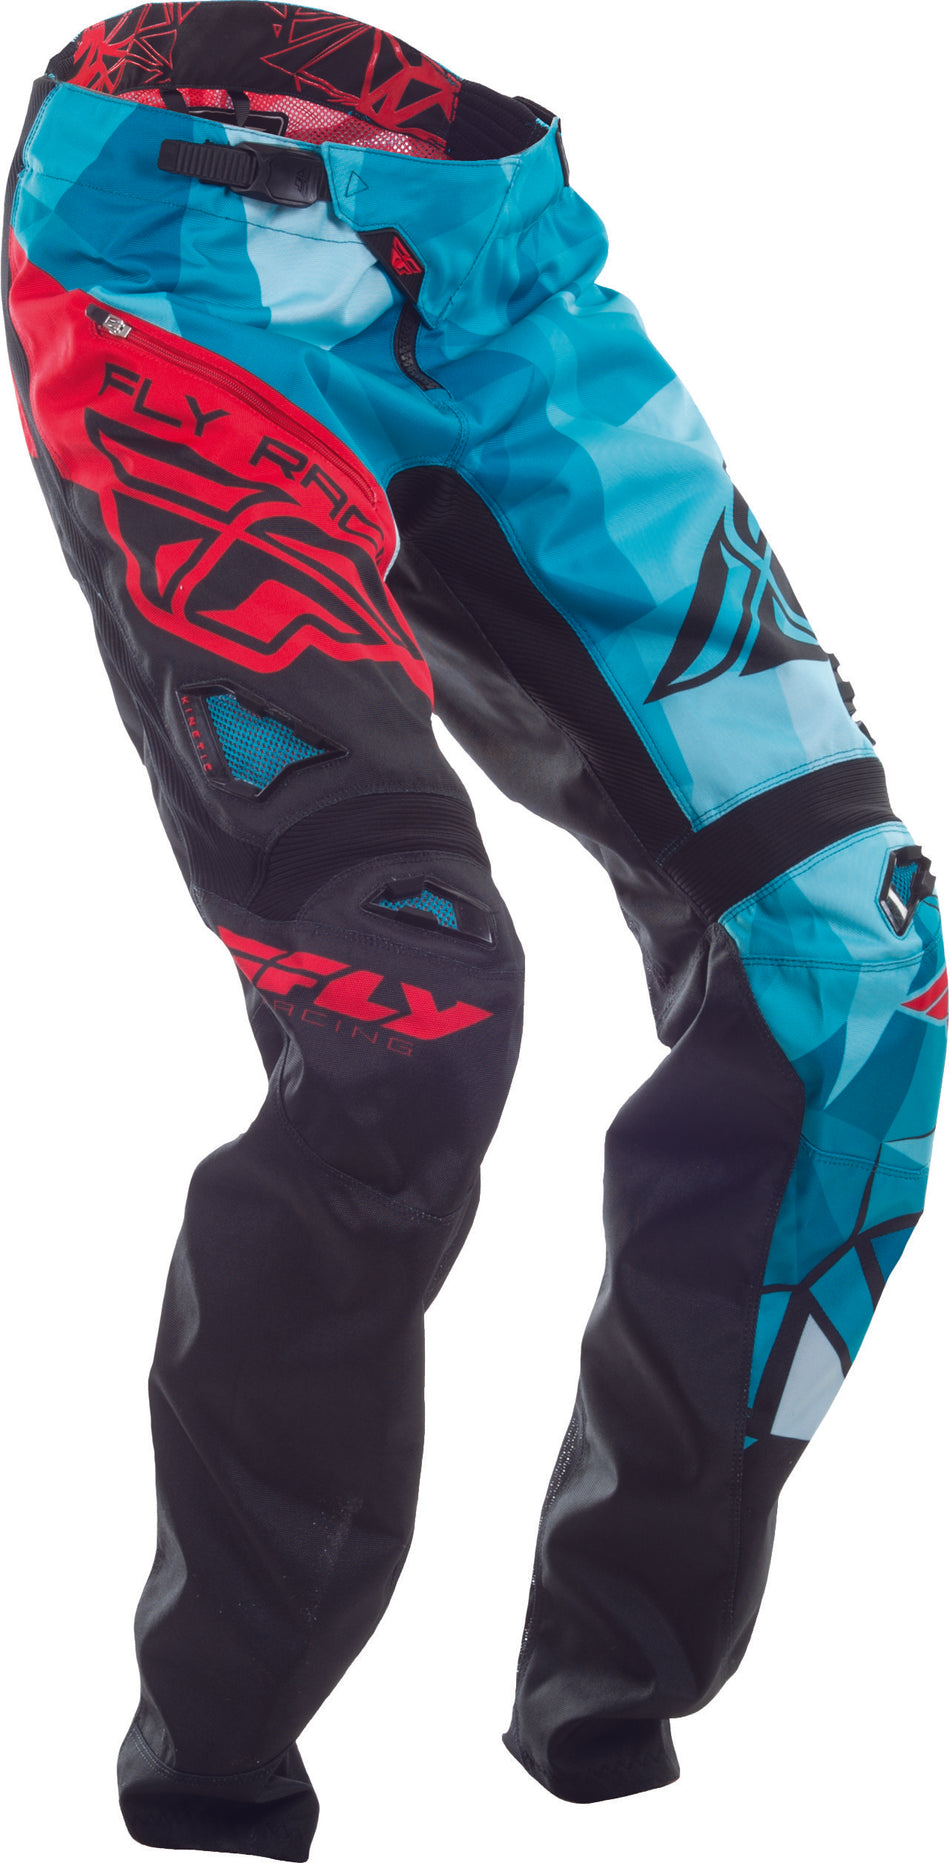 FLY RACING Bicycle Crux Pant Black/Teal/Red Sz 32 370-02932